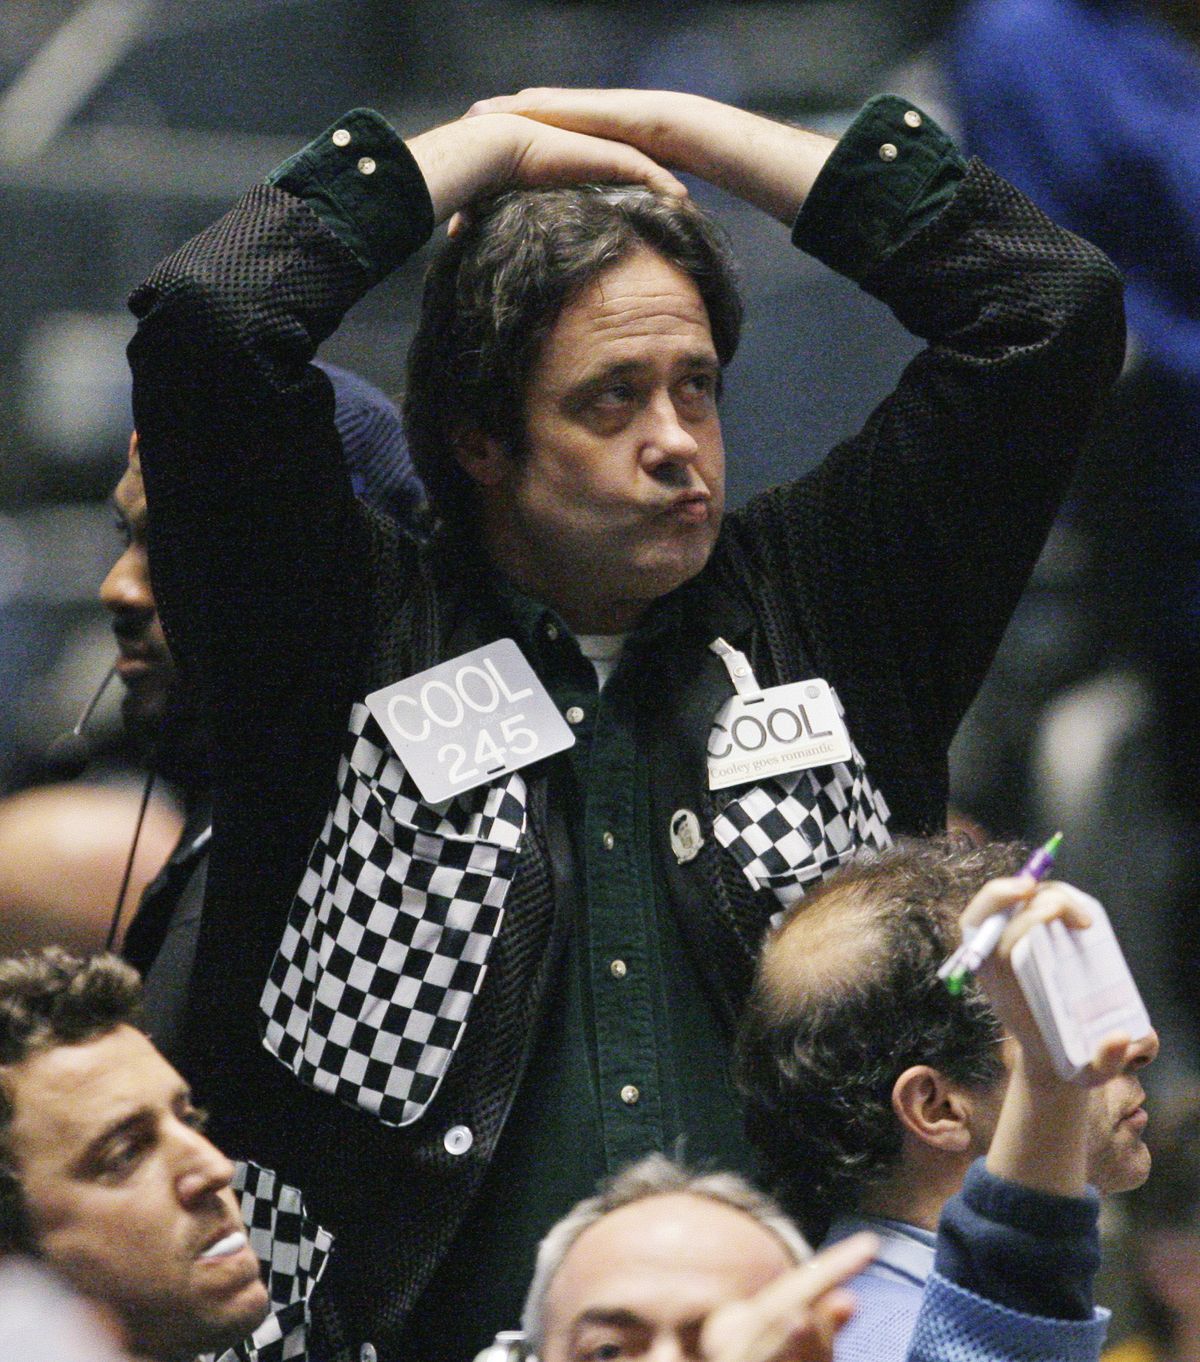 Trader Brain P. Cooley reacts in the Standard & Poor’s 500 futures pit near the close of trading at the CME Group in Chicago on Monday. The S&P 500 index dipped below 700 Monday before closing just above it.  (Associated Press / The Spokesman-Review)